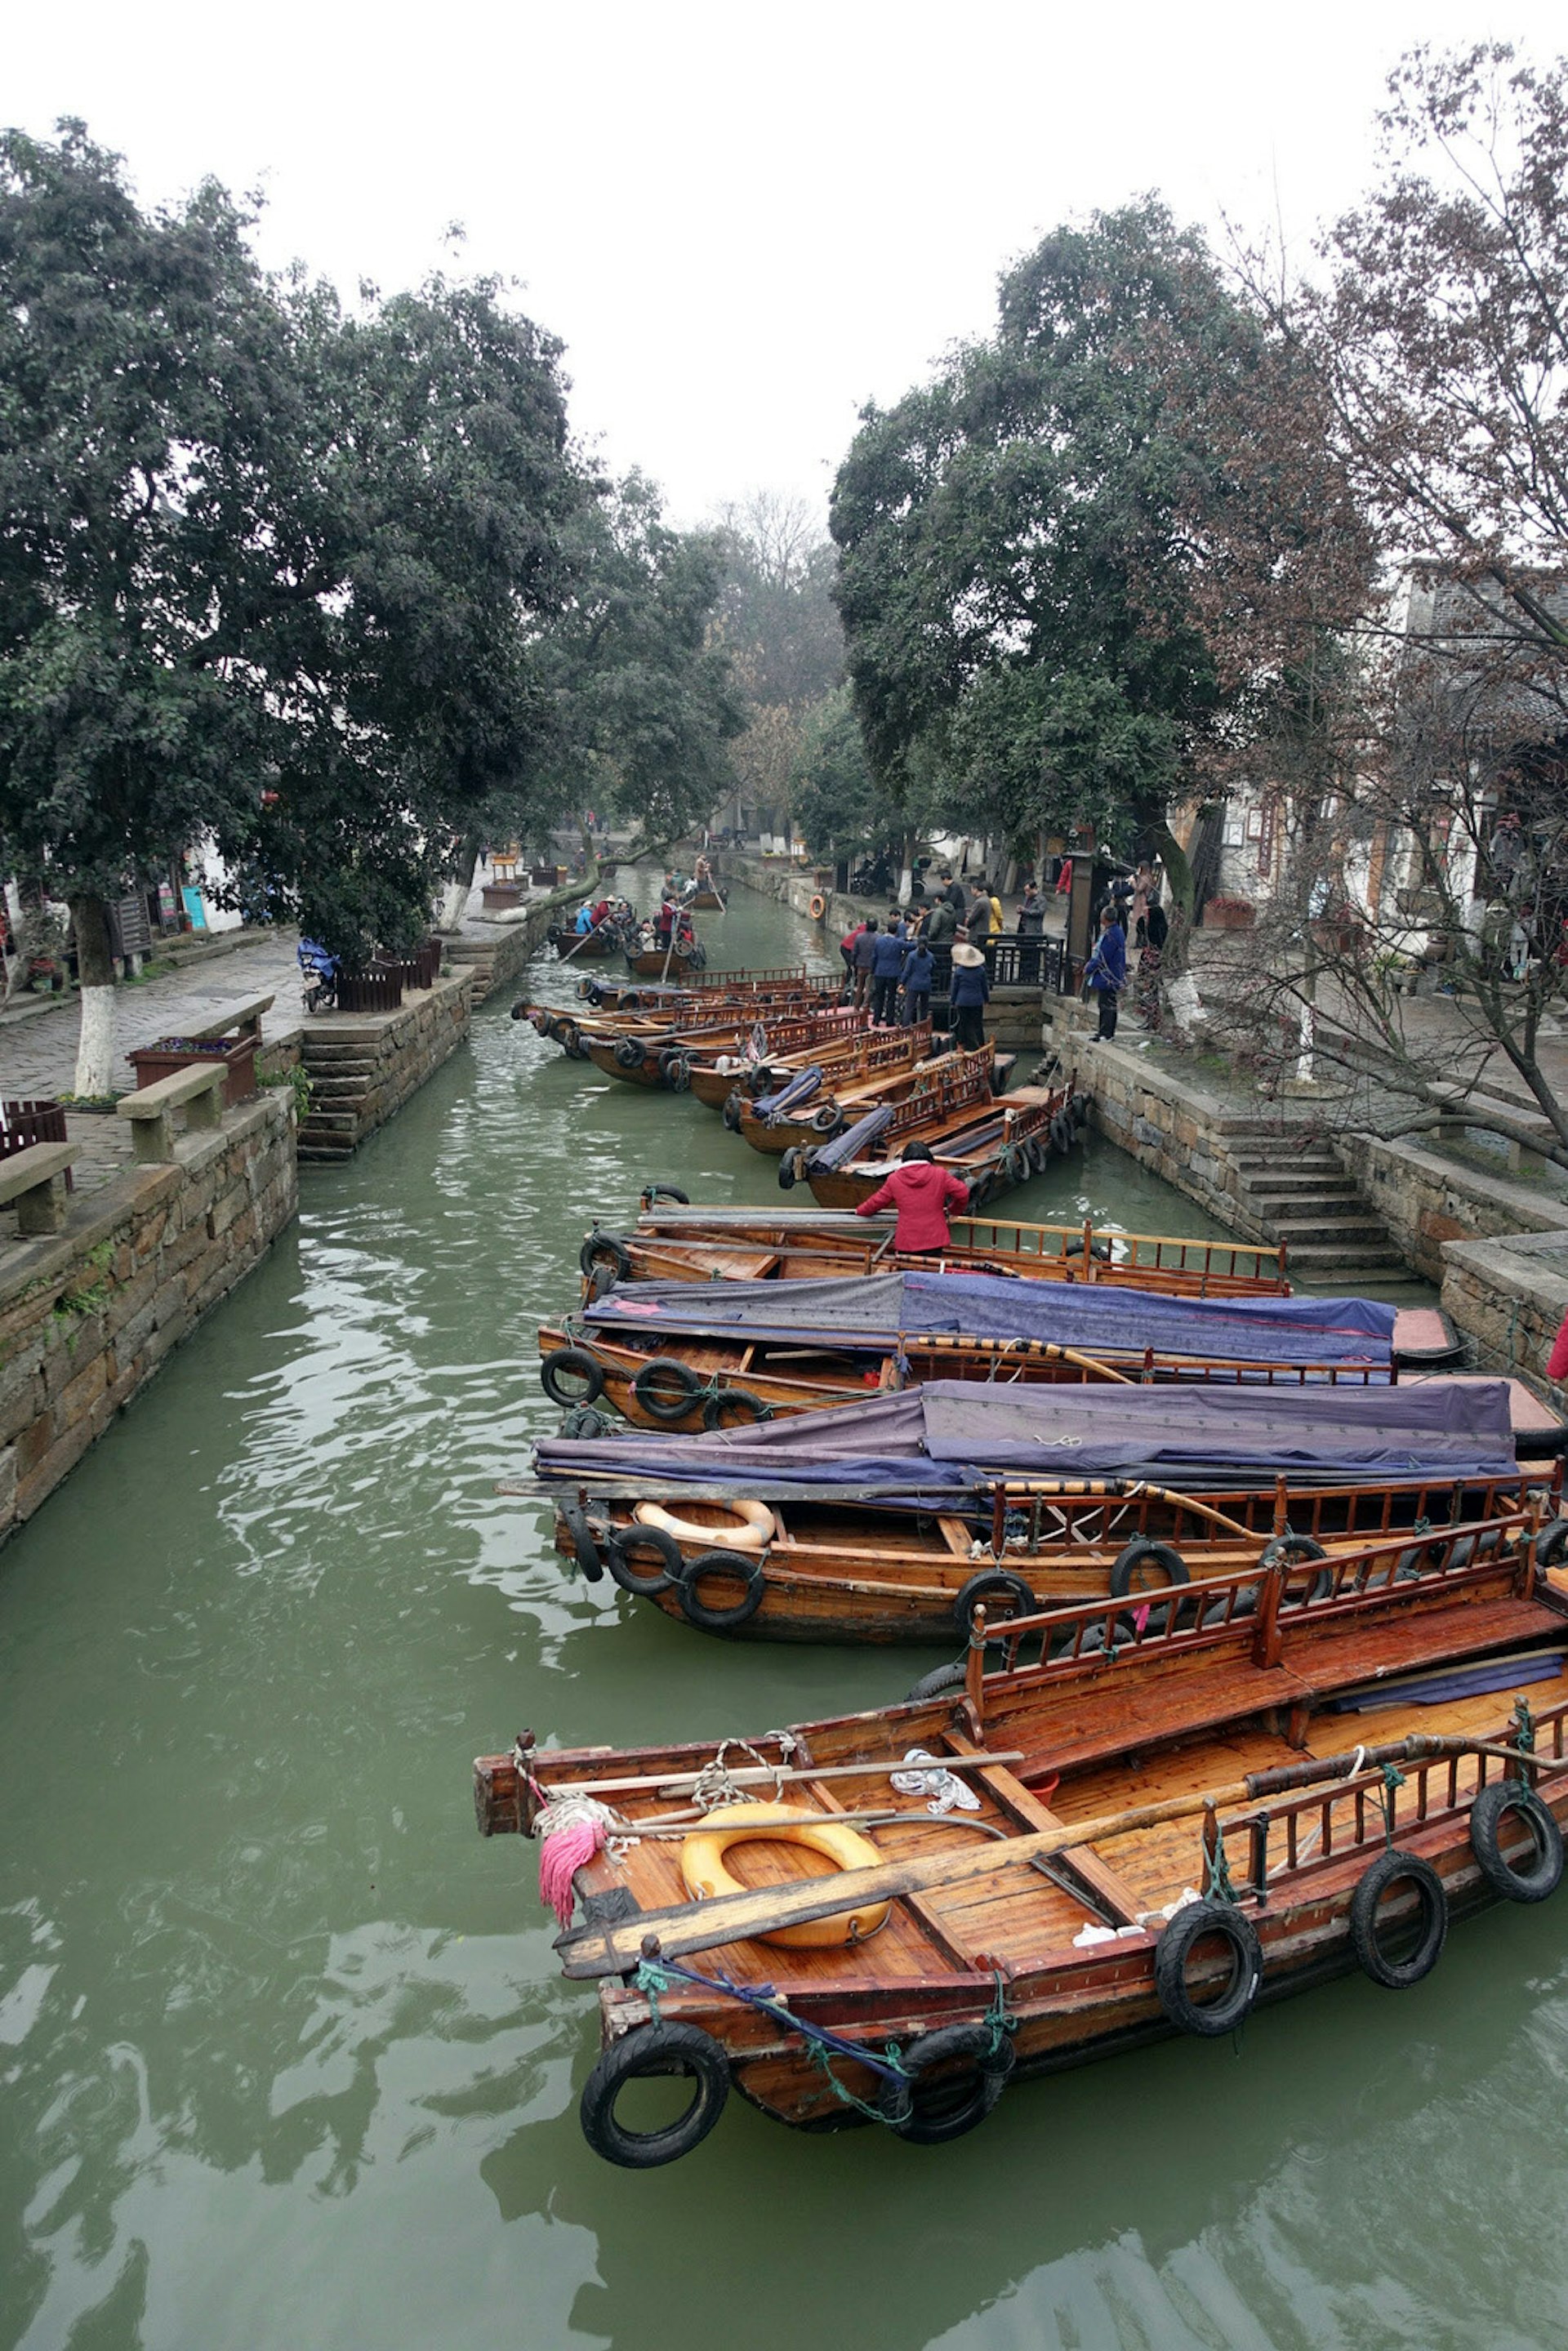 Wooden boats on a canal in Tongli